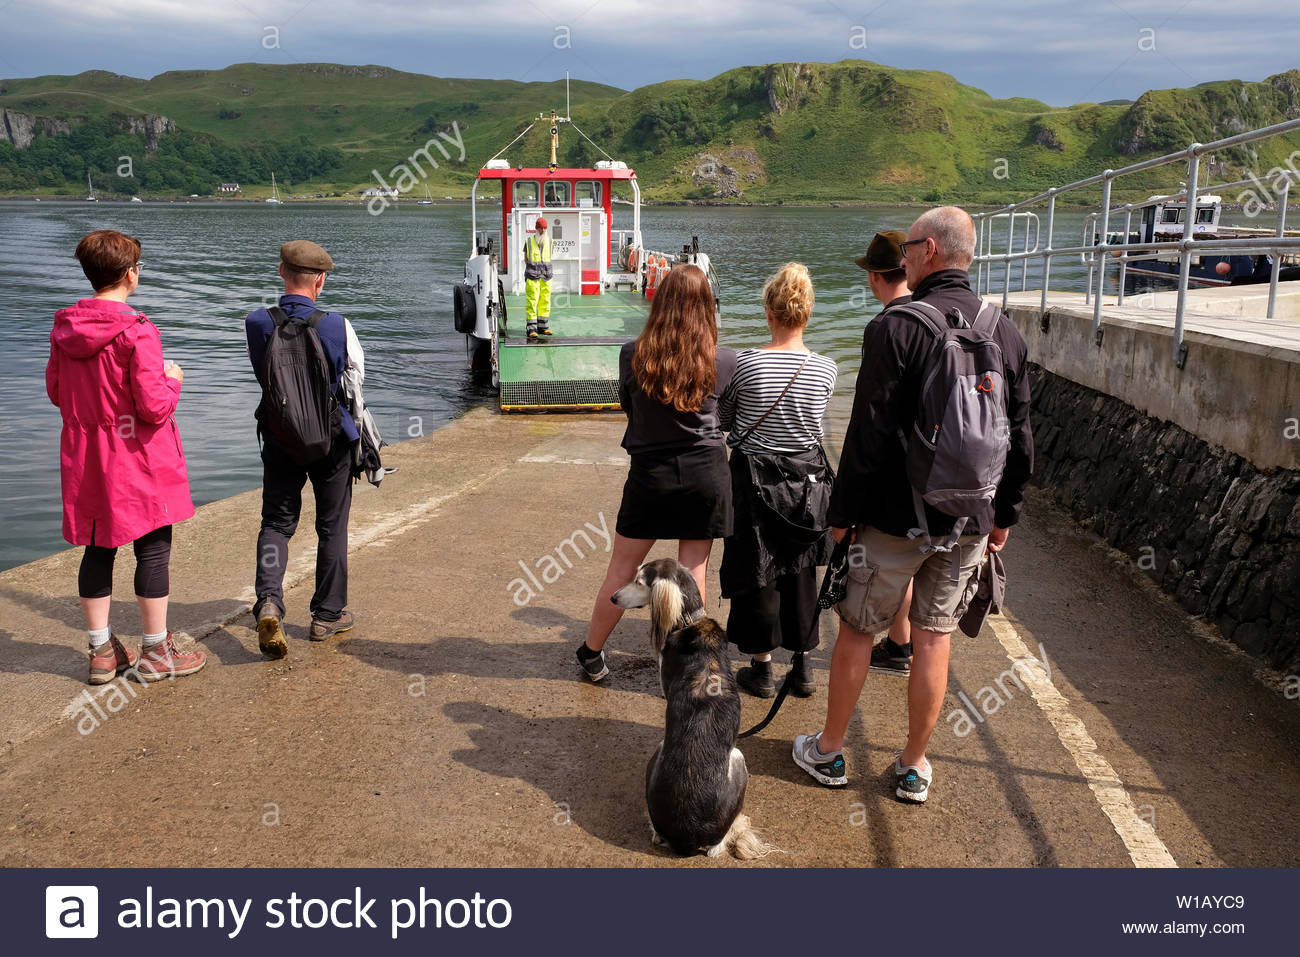 People on the Island of Kerrera boarding the Caledonian MacBrayne ferry Carvoria, to be ferried across the Sound of Kerrera to the Scottish mainland Stock Photo